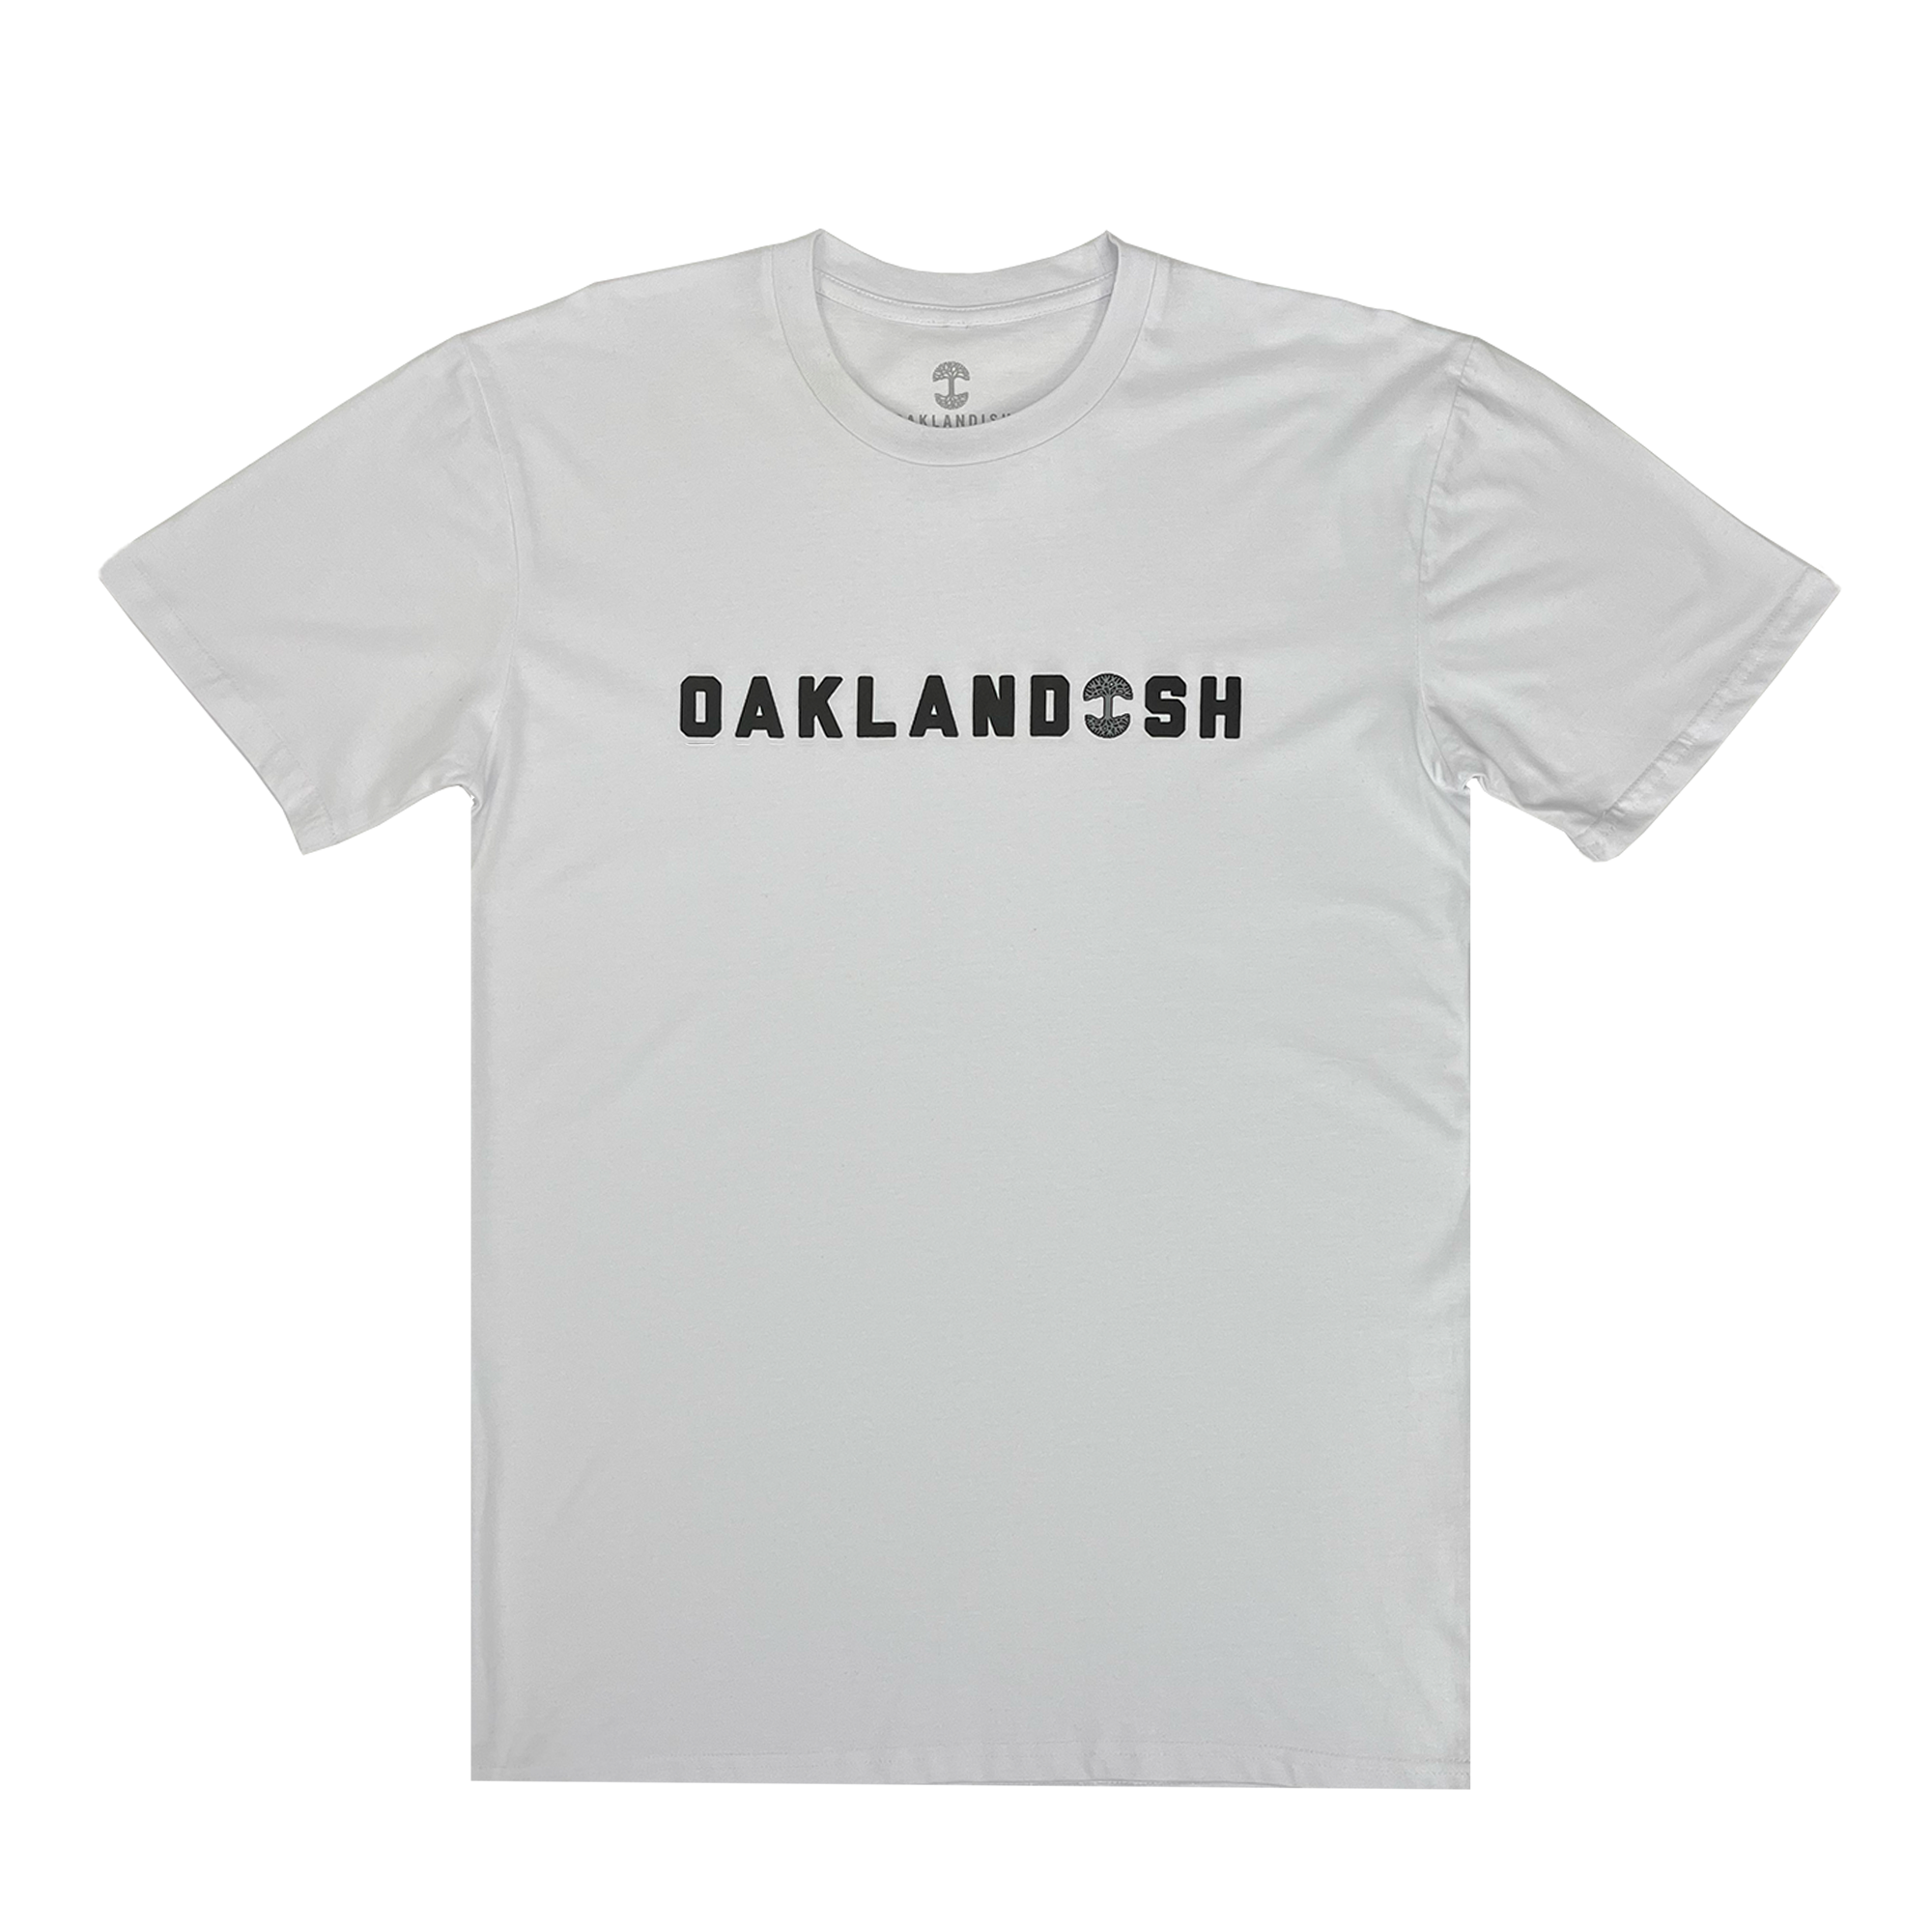 Cotton white t-shirt with Oaklandish Wordmark and Oaklandish tree logo in place of 'i'.